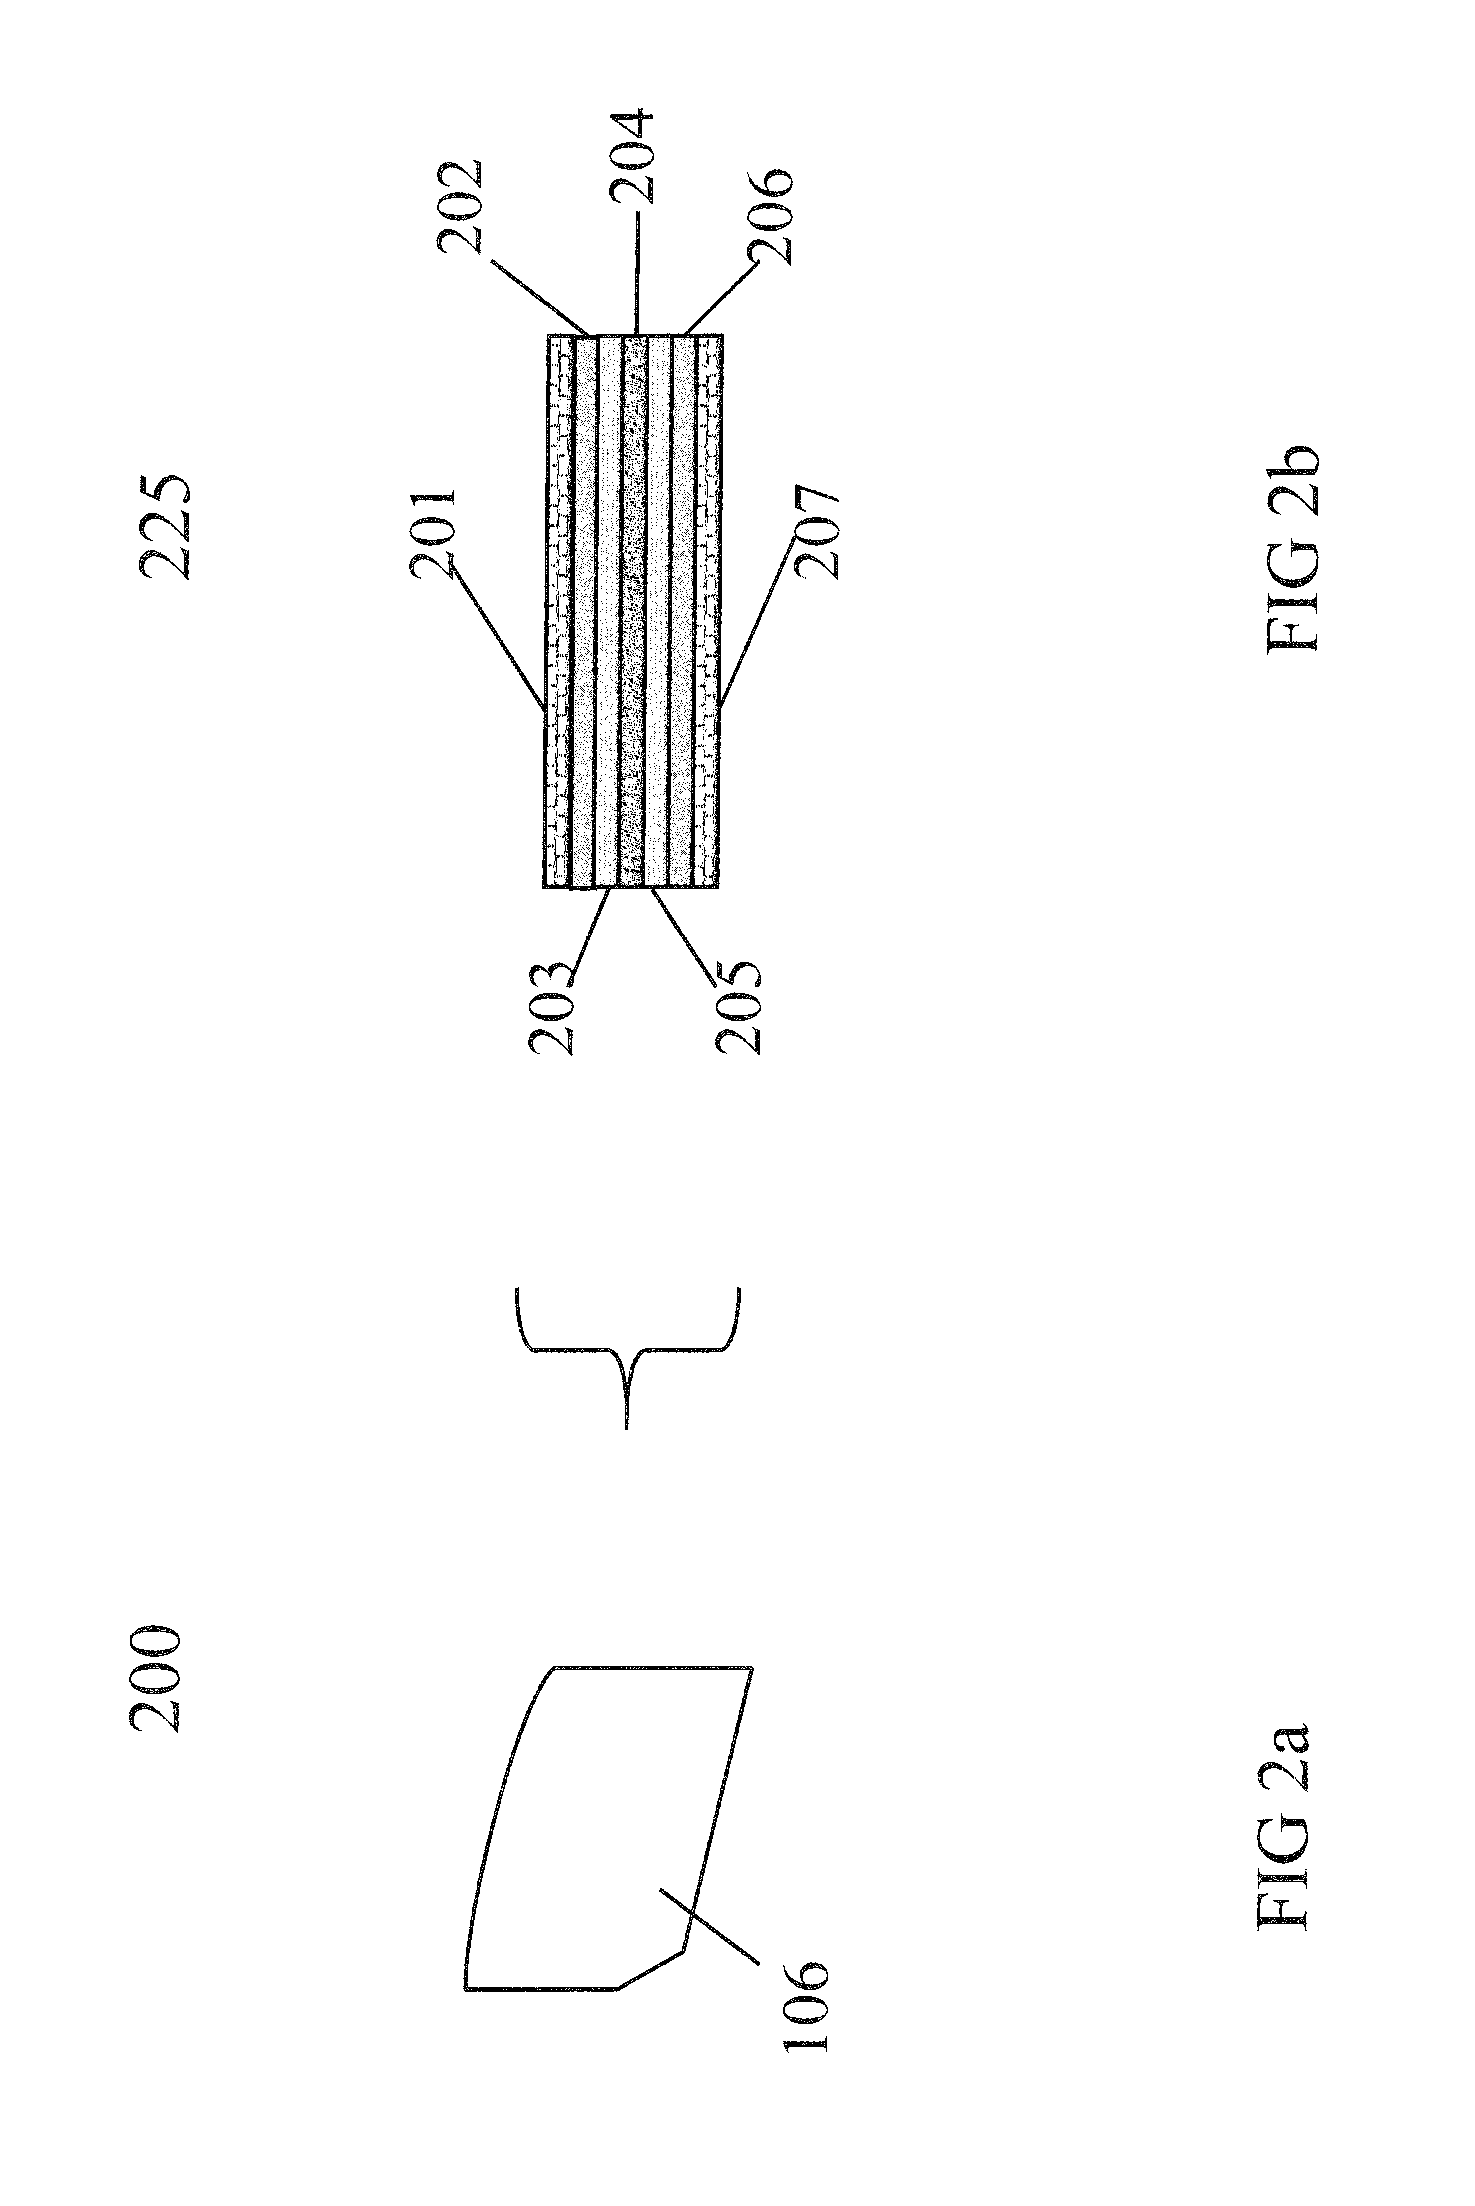 Continuous adjustable 3Deeps filter spectacles for optimized 3Deeps stereoscopic viewing and its control method and means